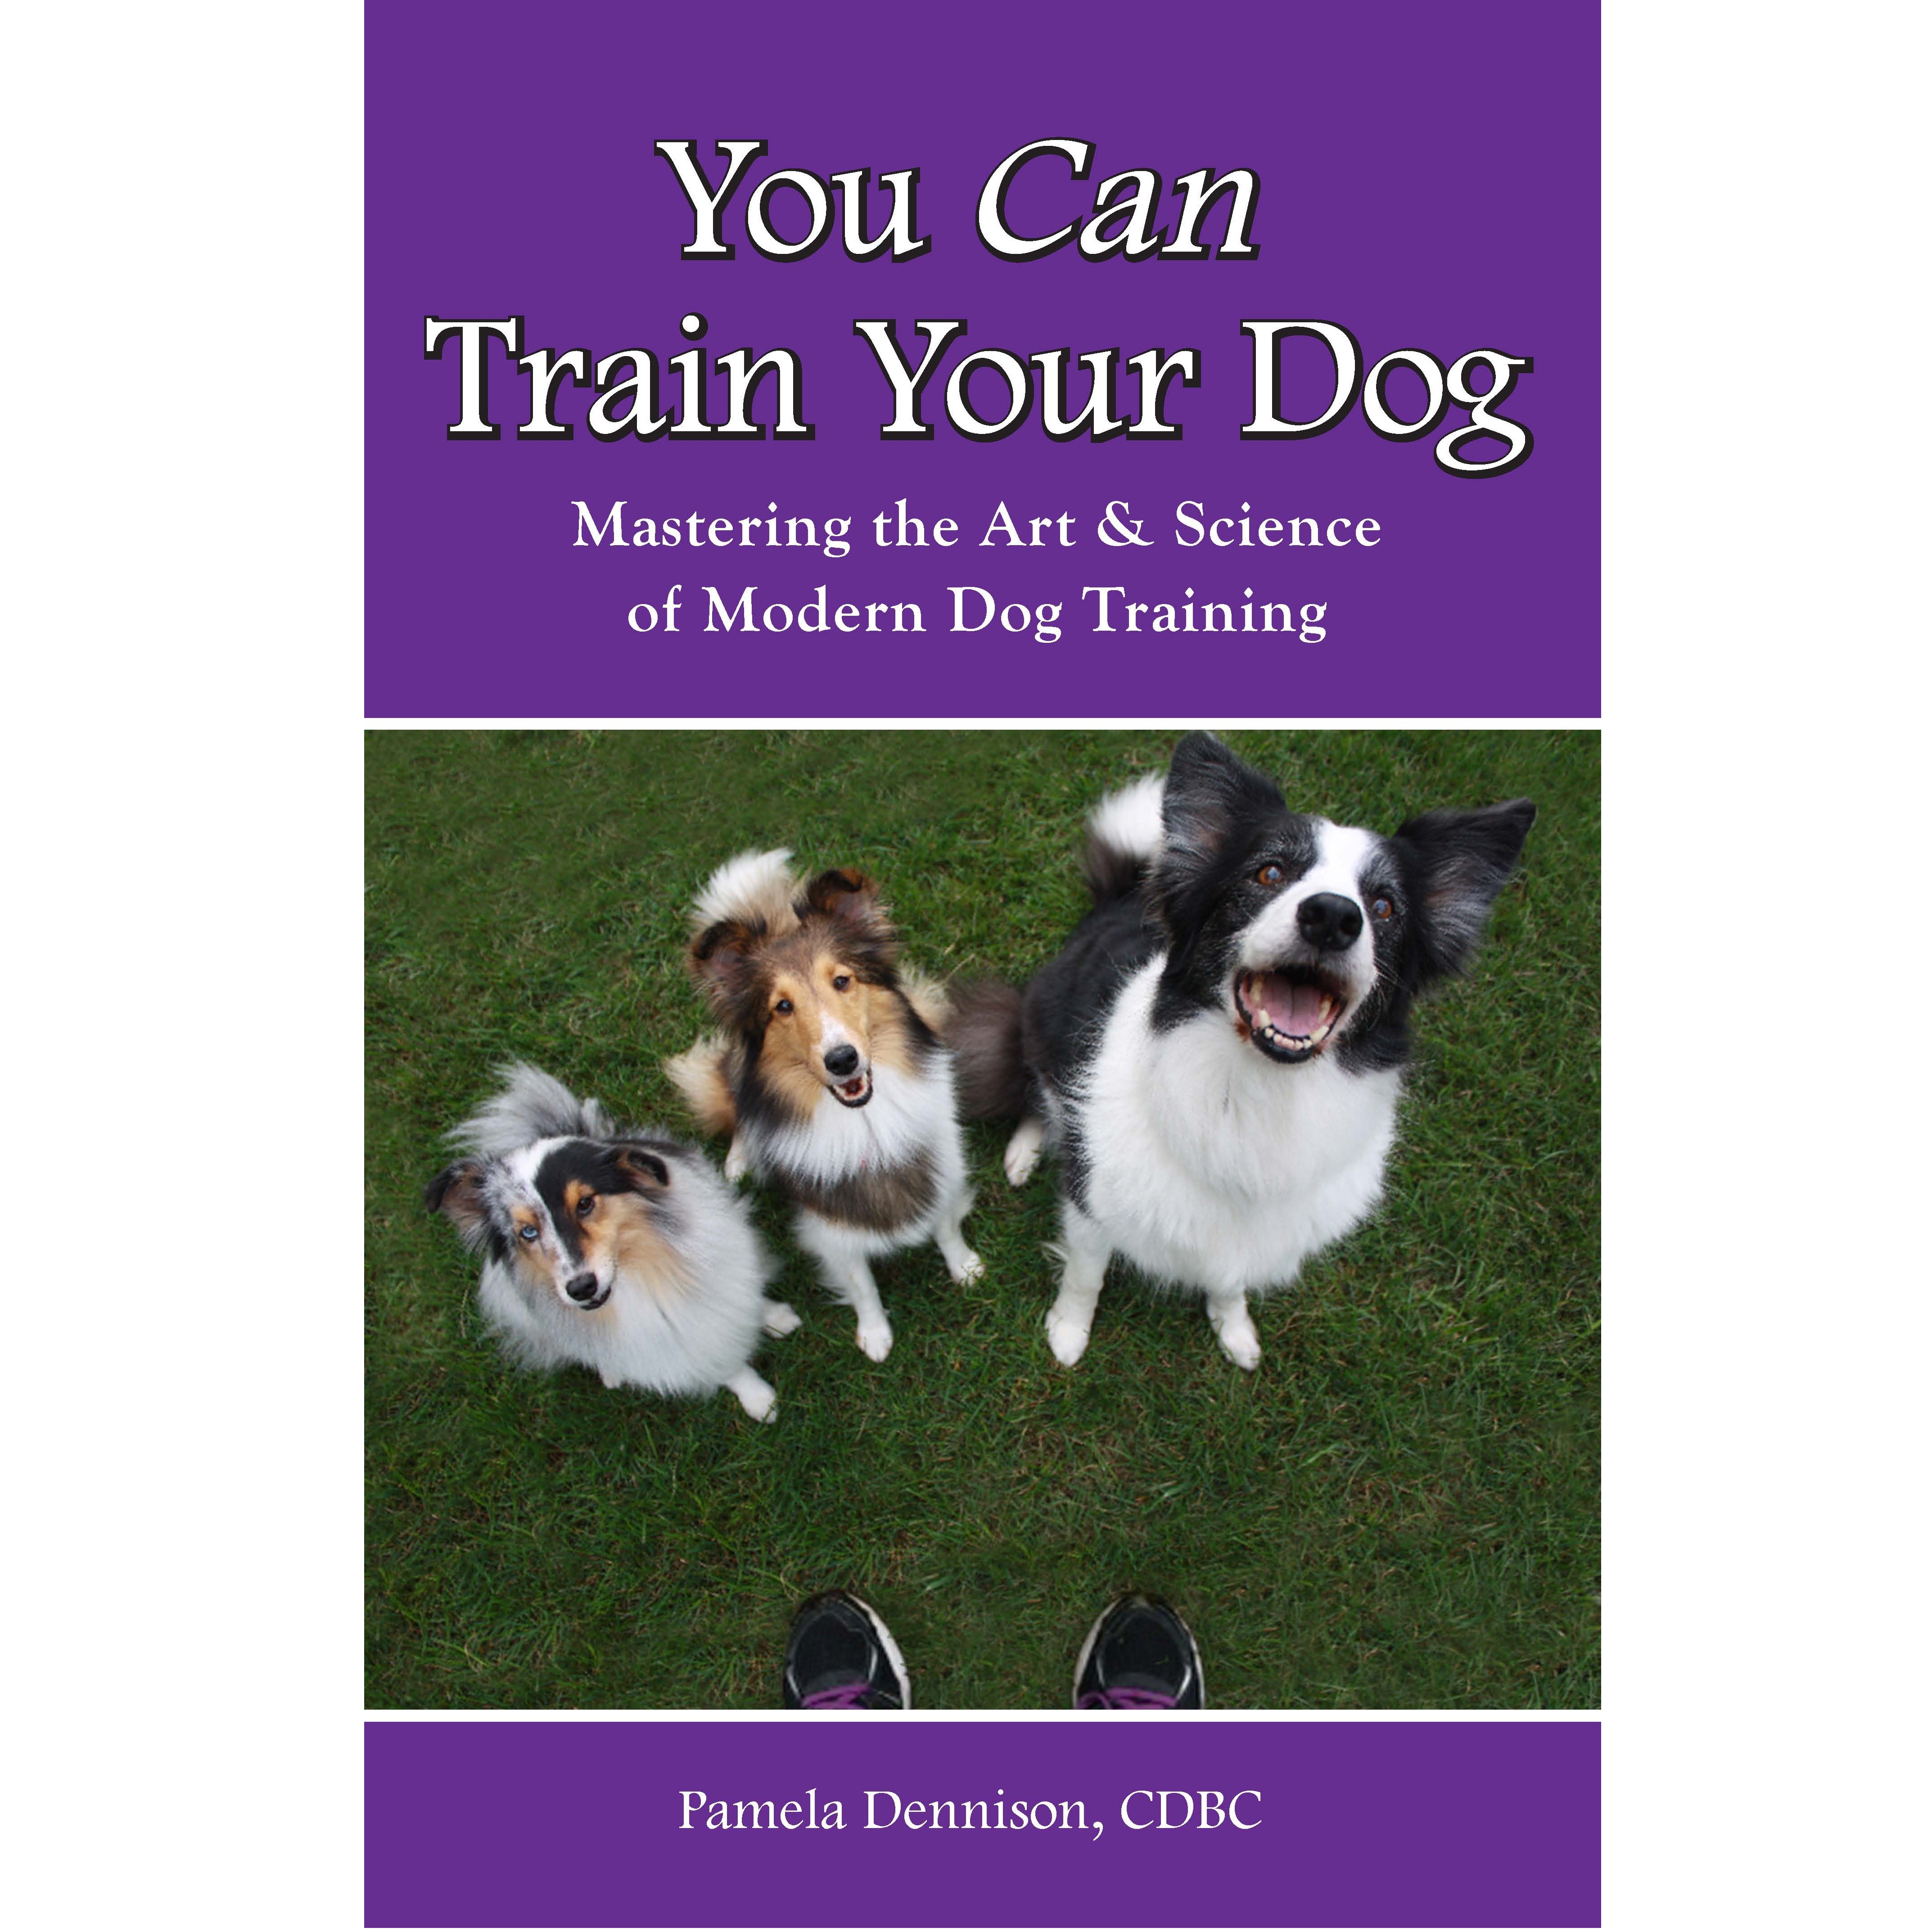 Ebook: Mind Games for Dogs - Dogwise Solutions - Dogwise